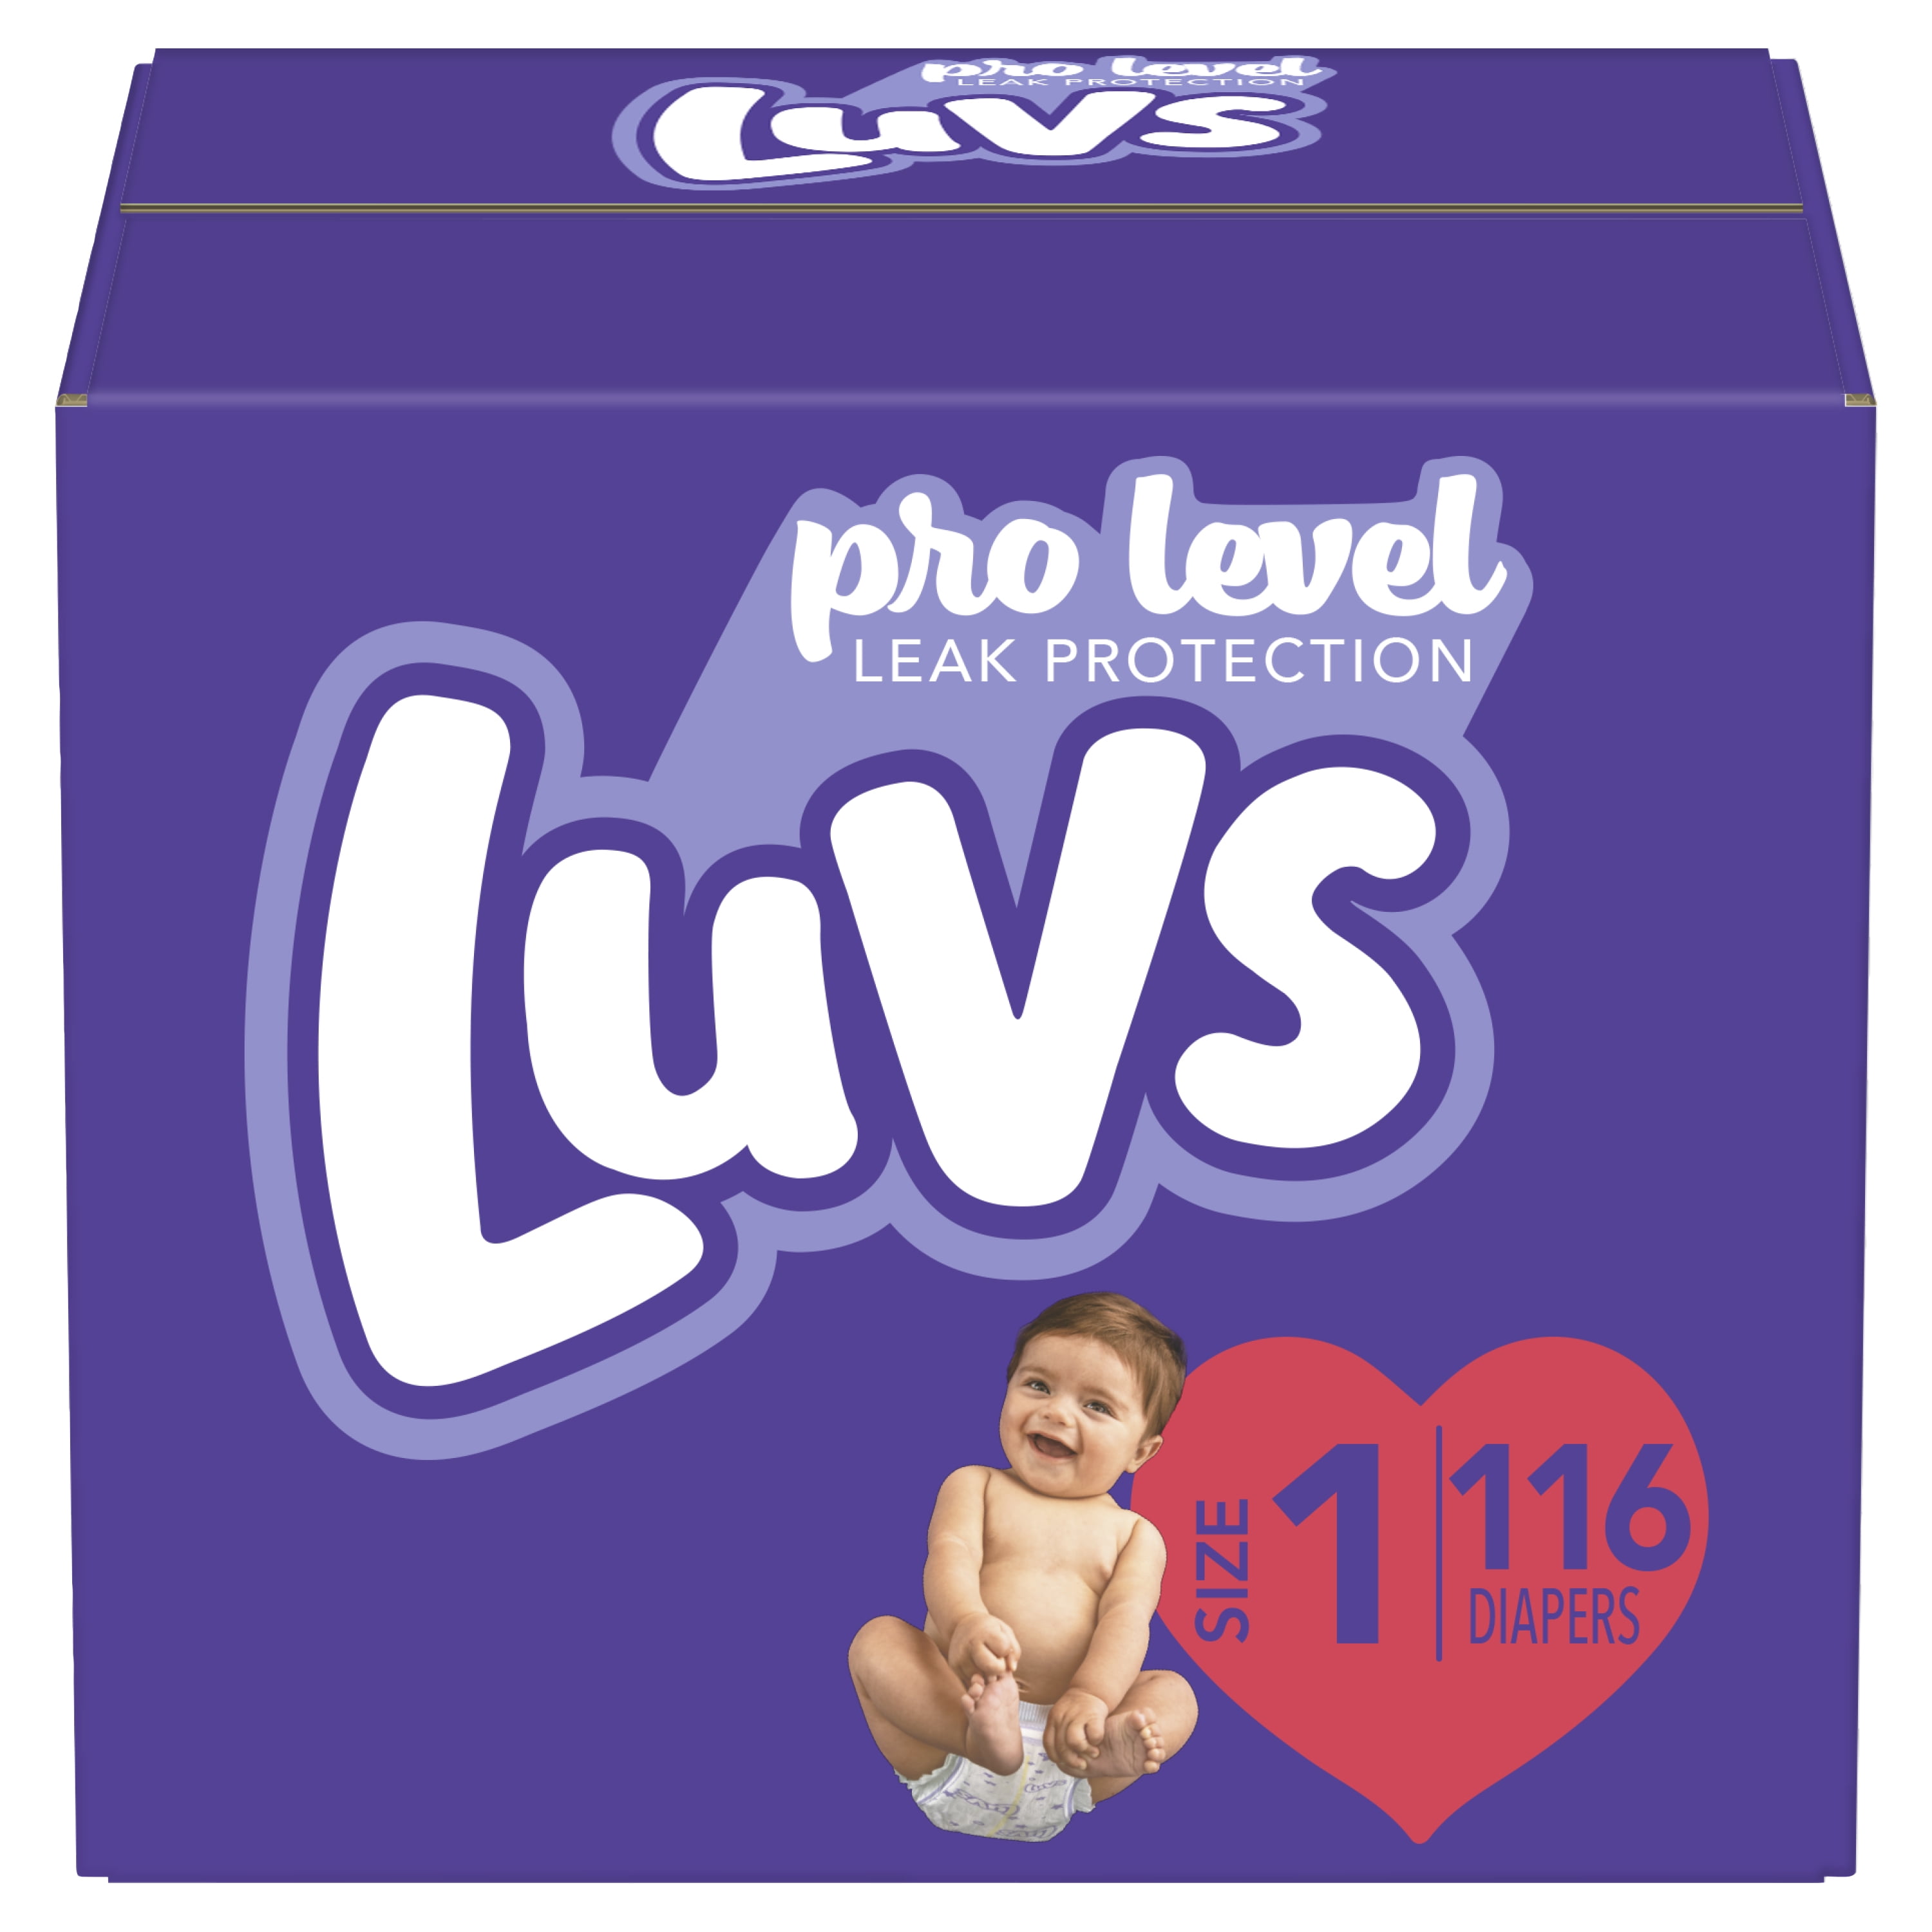 One Month Su Luvs Ultra Leakguards Disposable Diapers Newborn Size 1 252 Count 